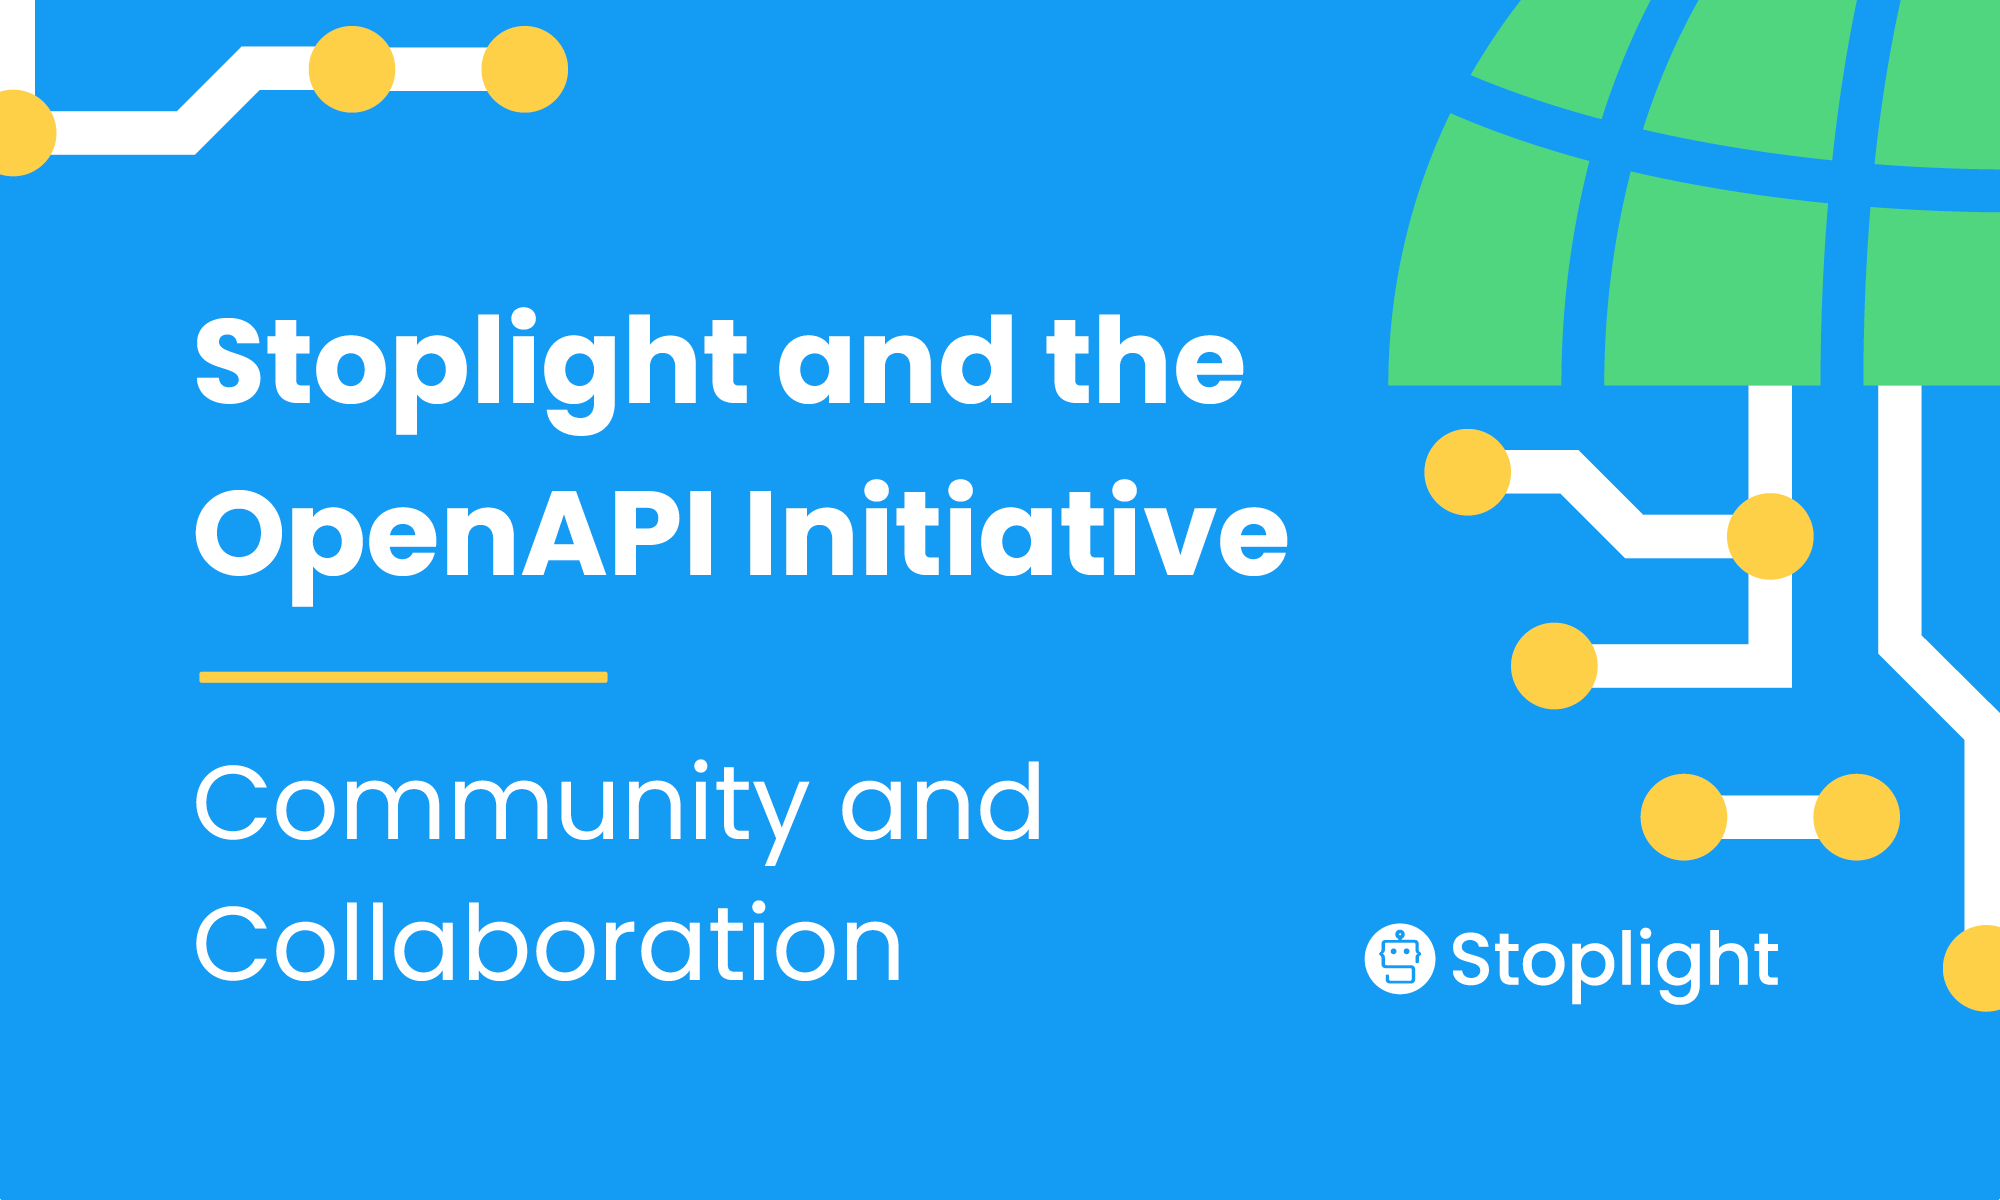 Stoplight and the OpenAPI Initiative: Community and Collaboration